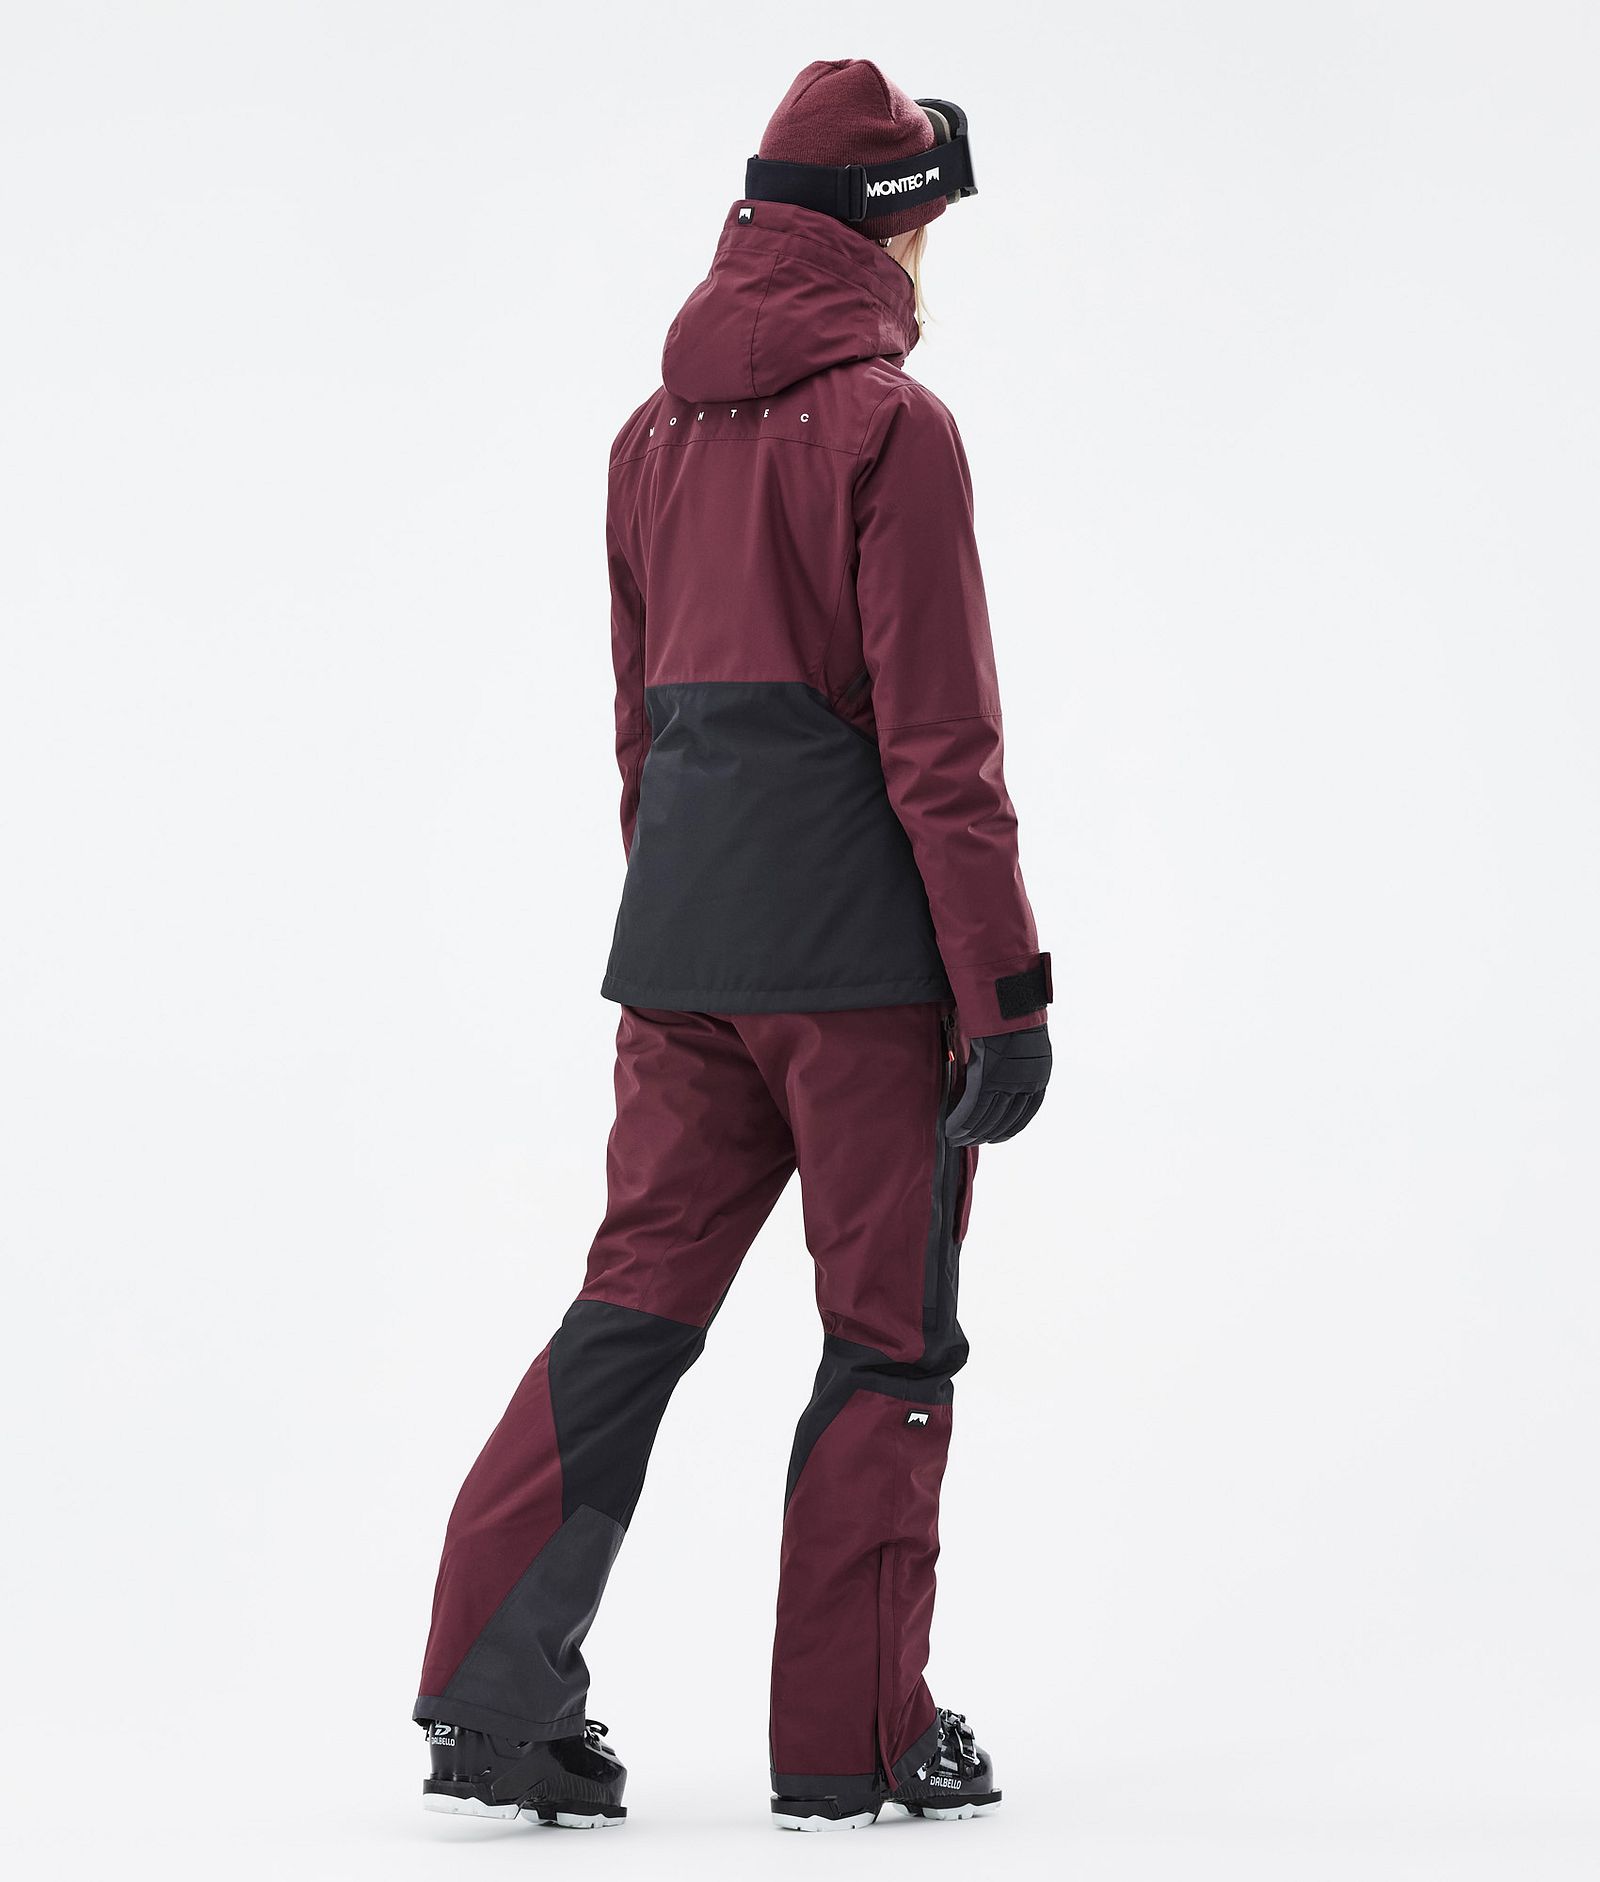 Moss W Outfit Sci Donna Burgundy/Black